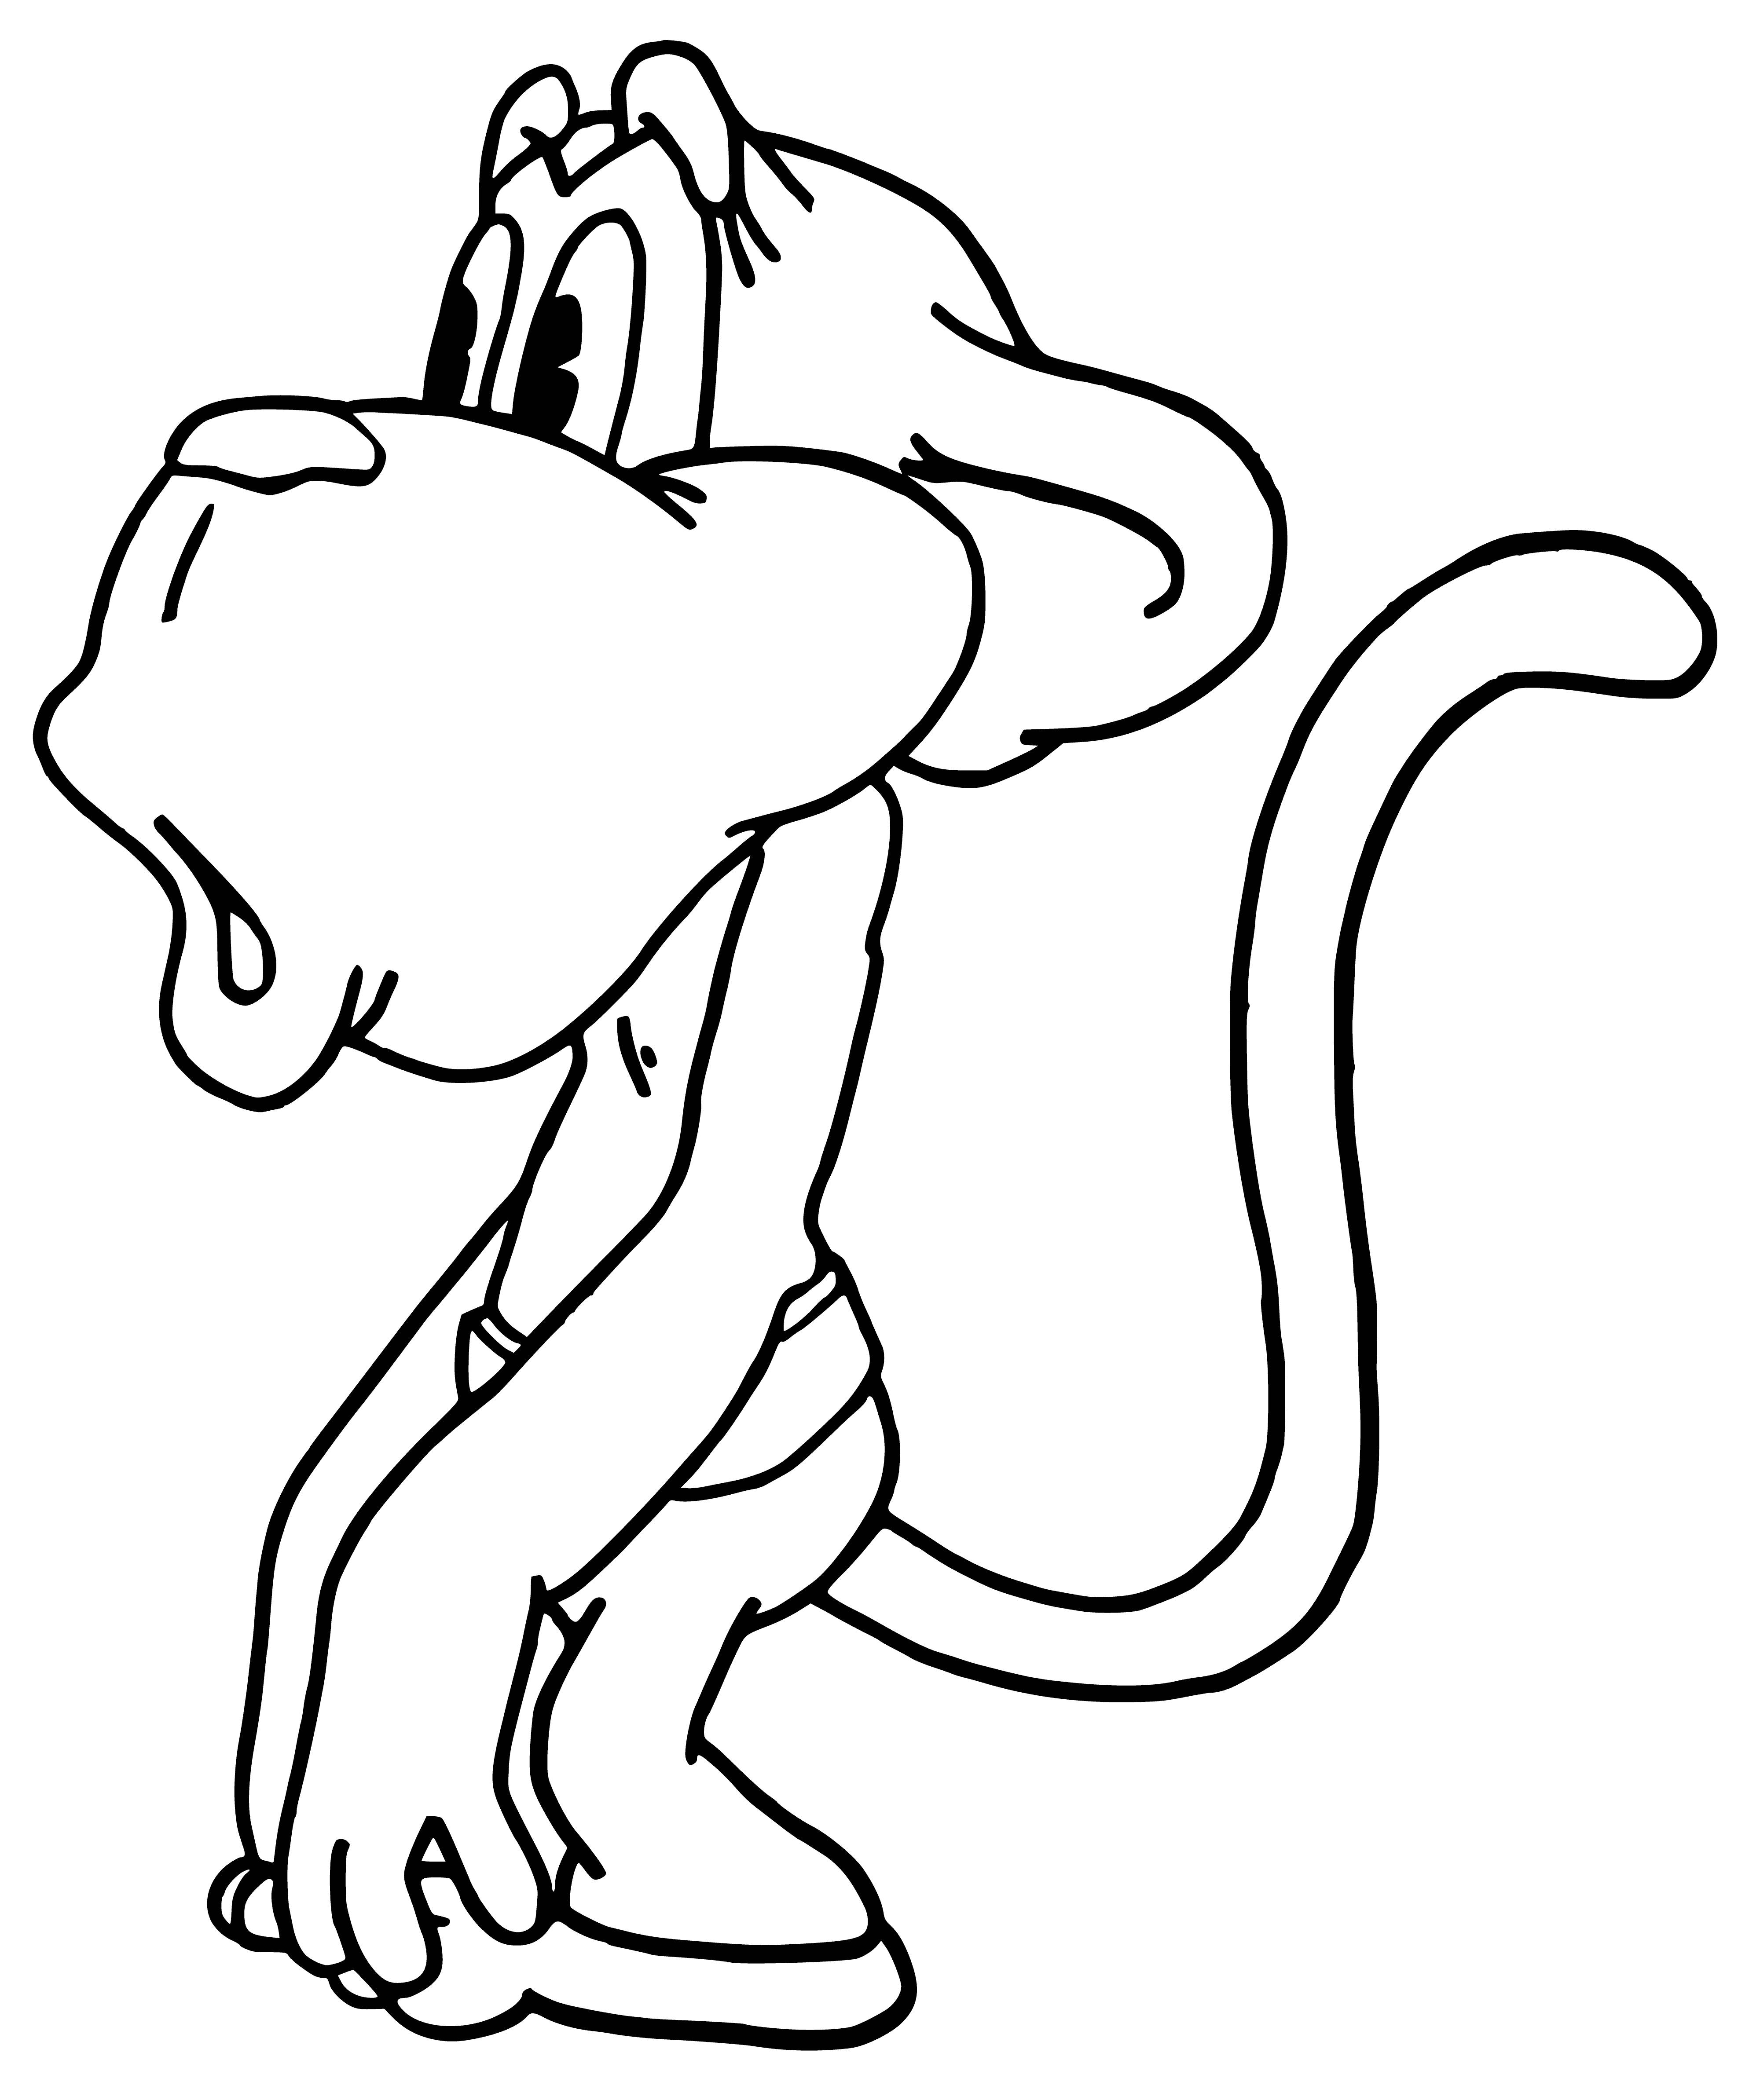 coloring page: A small raccoon hugs a tree, with brown and white fur and a long fluffy tail. Open mouth reveals its teeth.